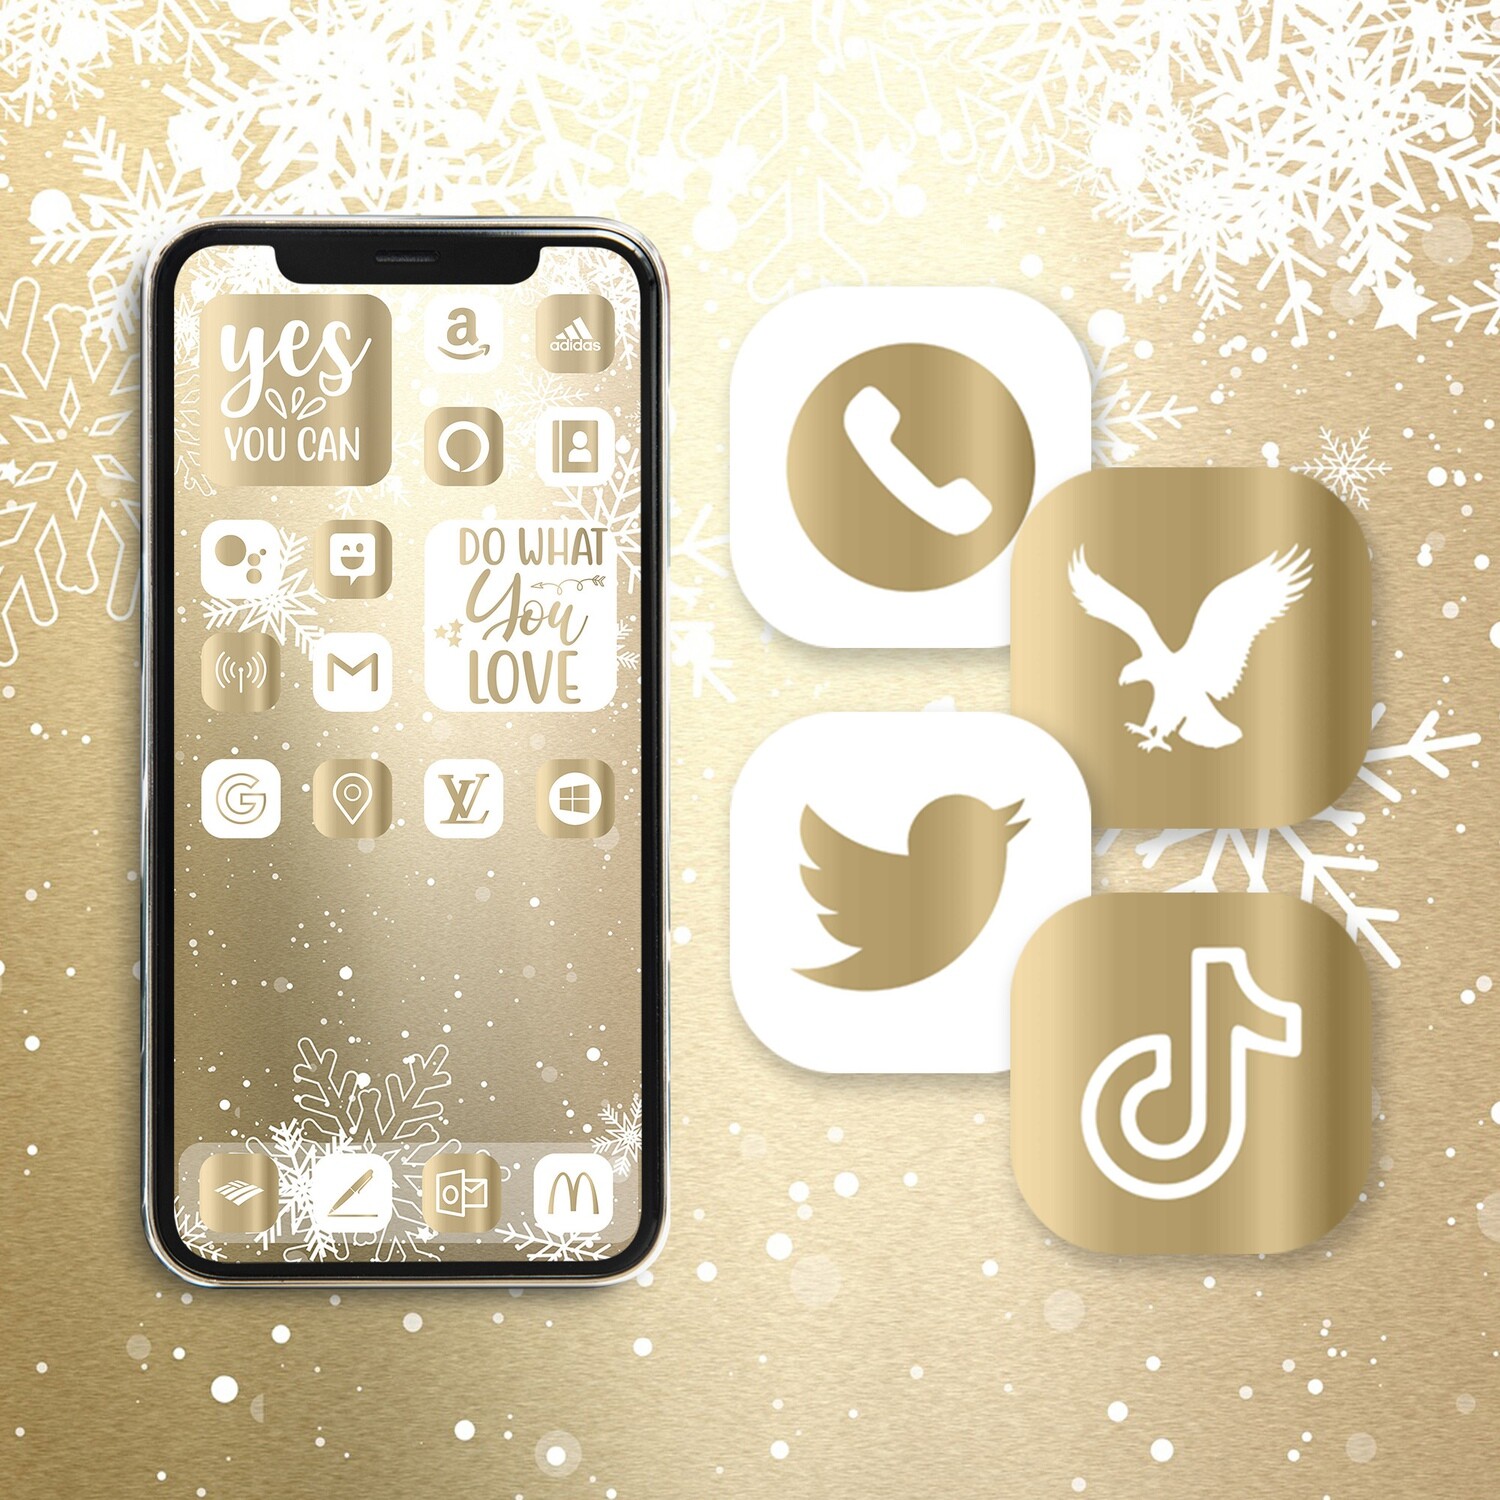 Gold White Christmas app icons ios 15 icons aesthetic